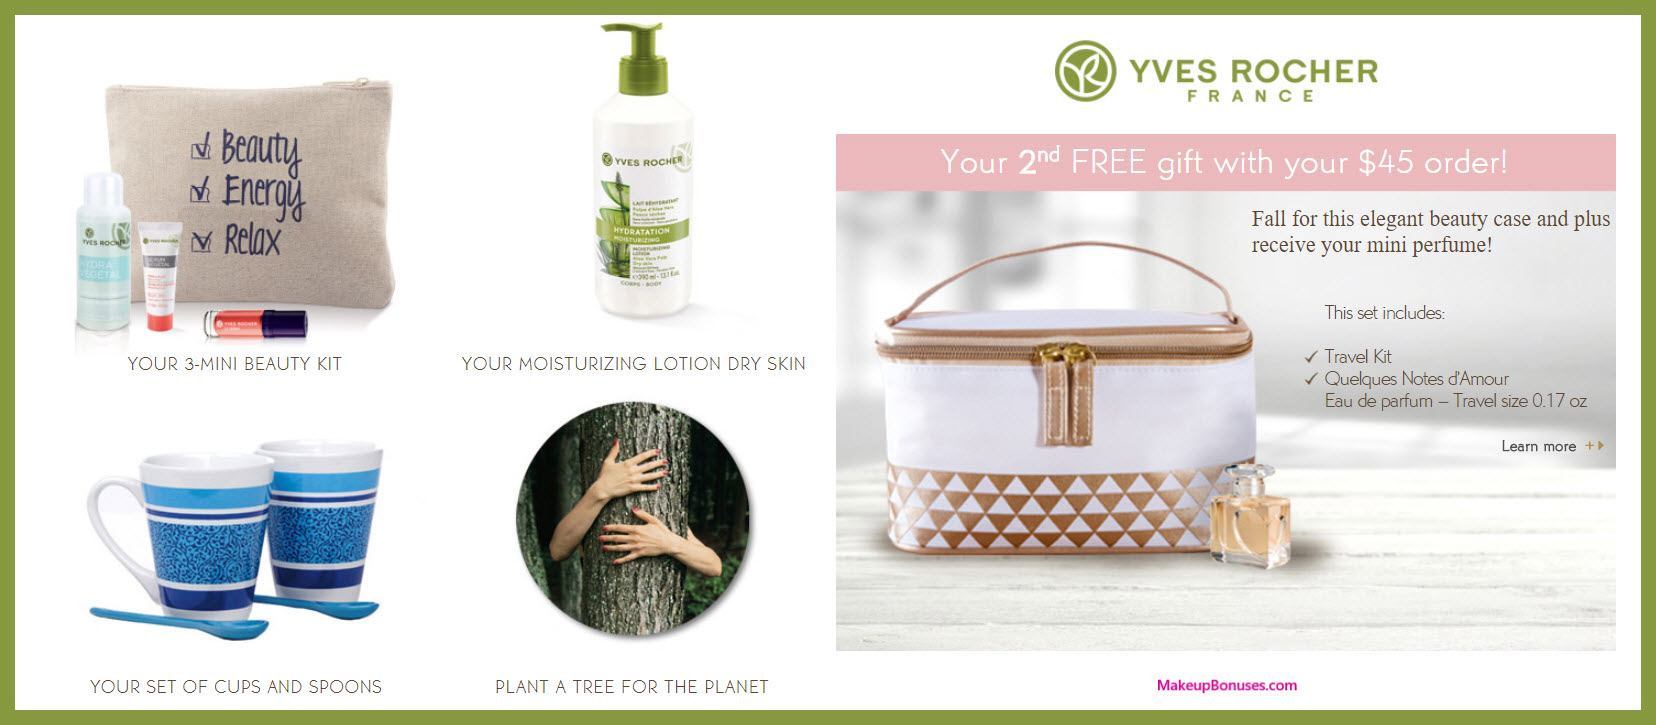 Receive your choice of 4-pc gift with $10 Yves Rocher purchase